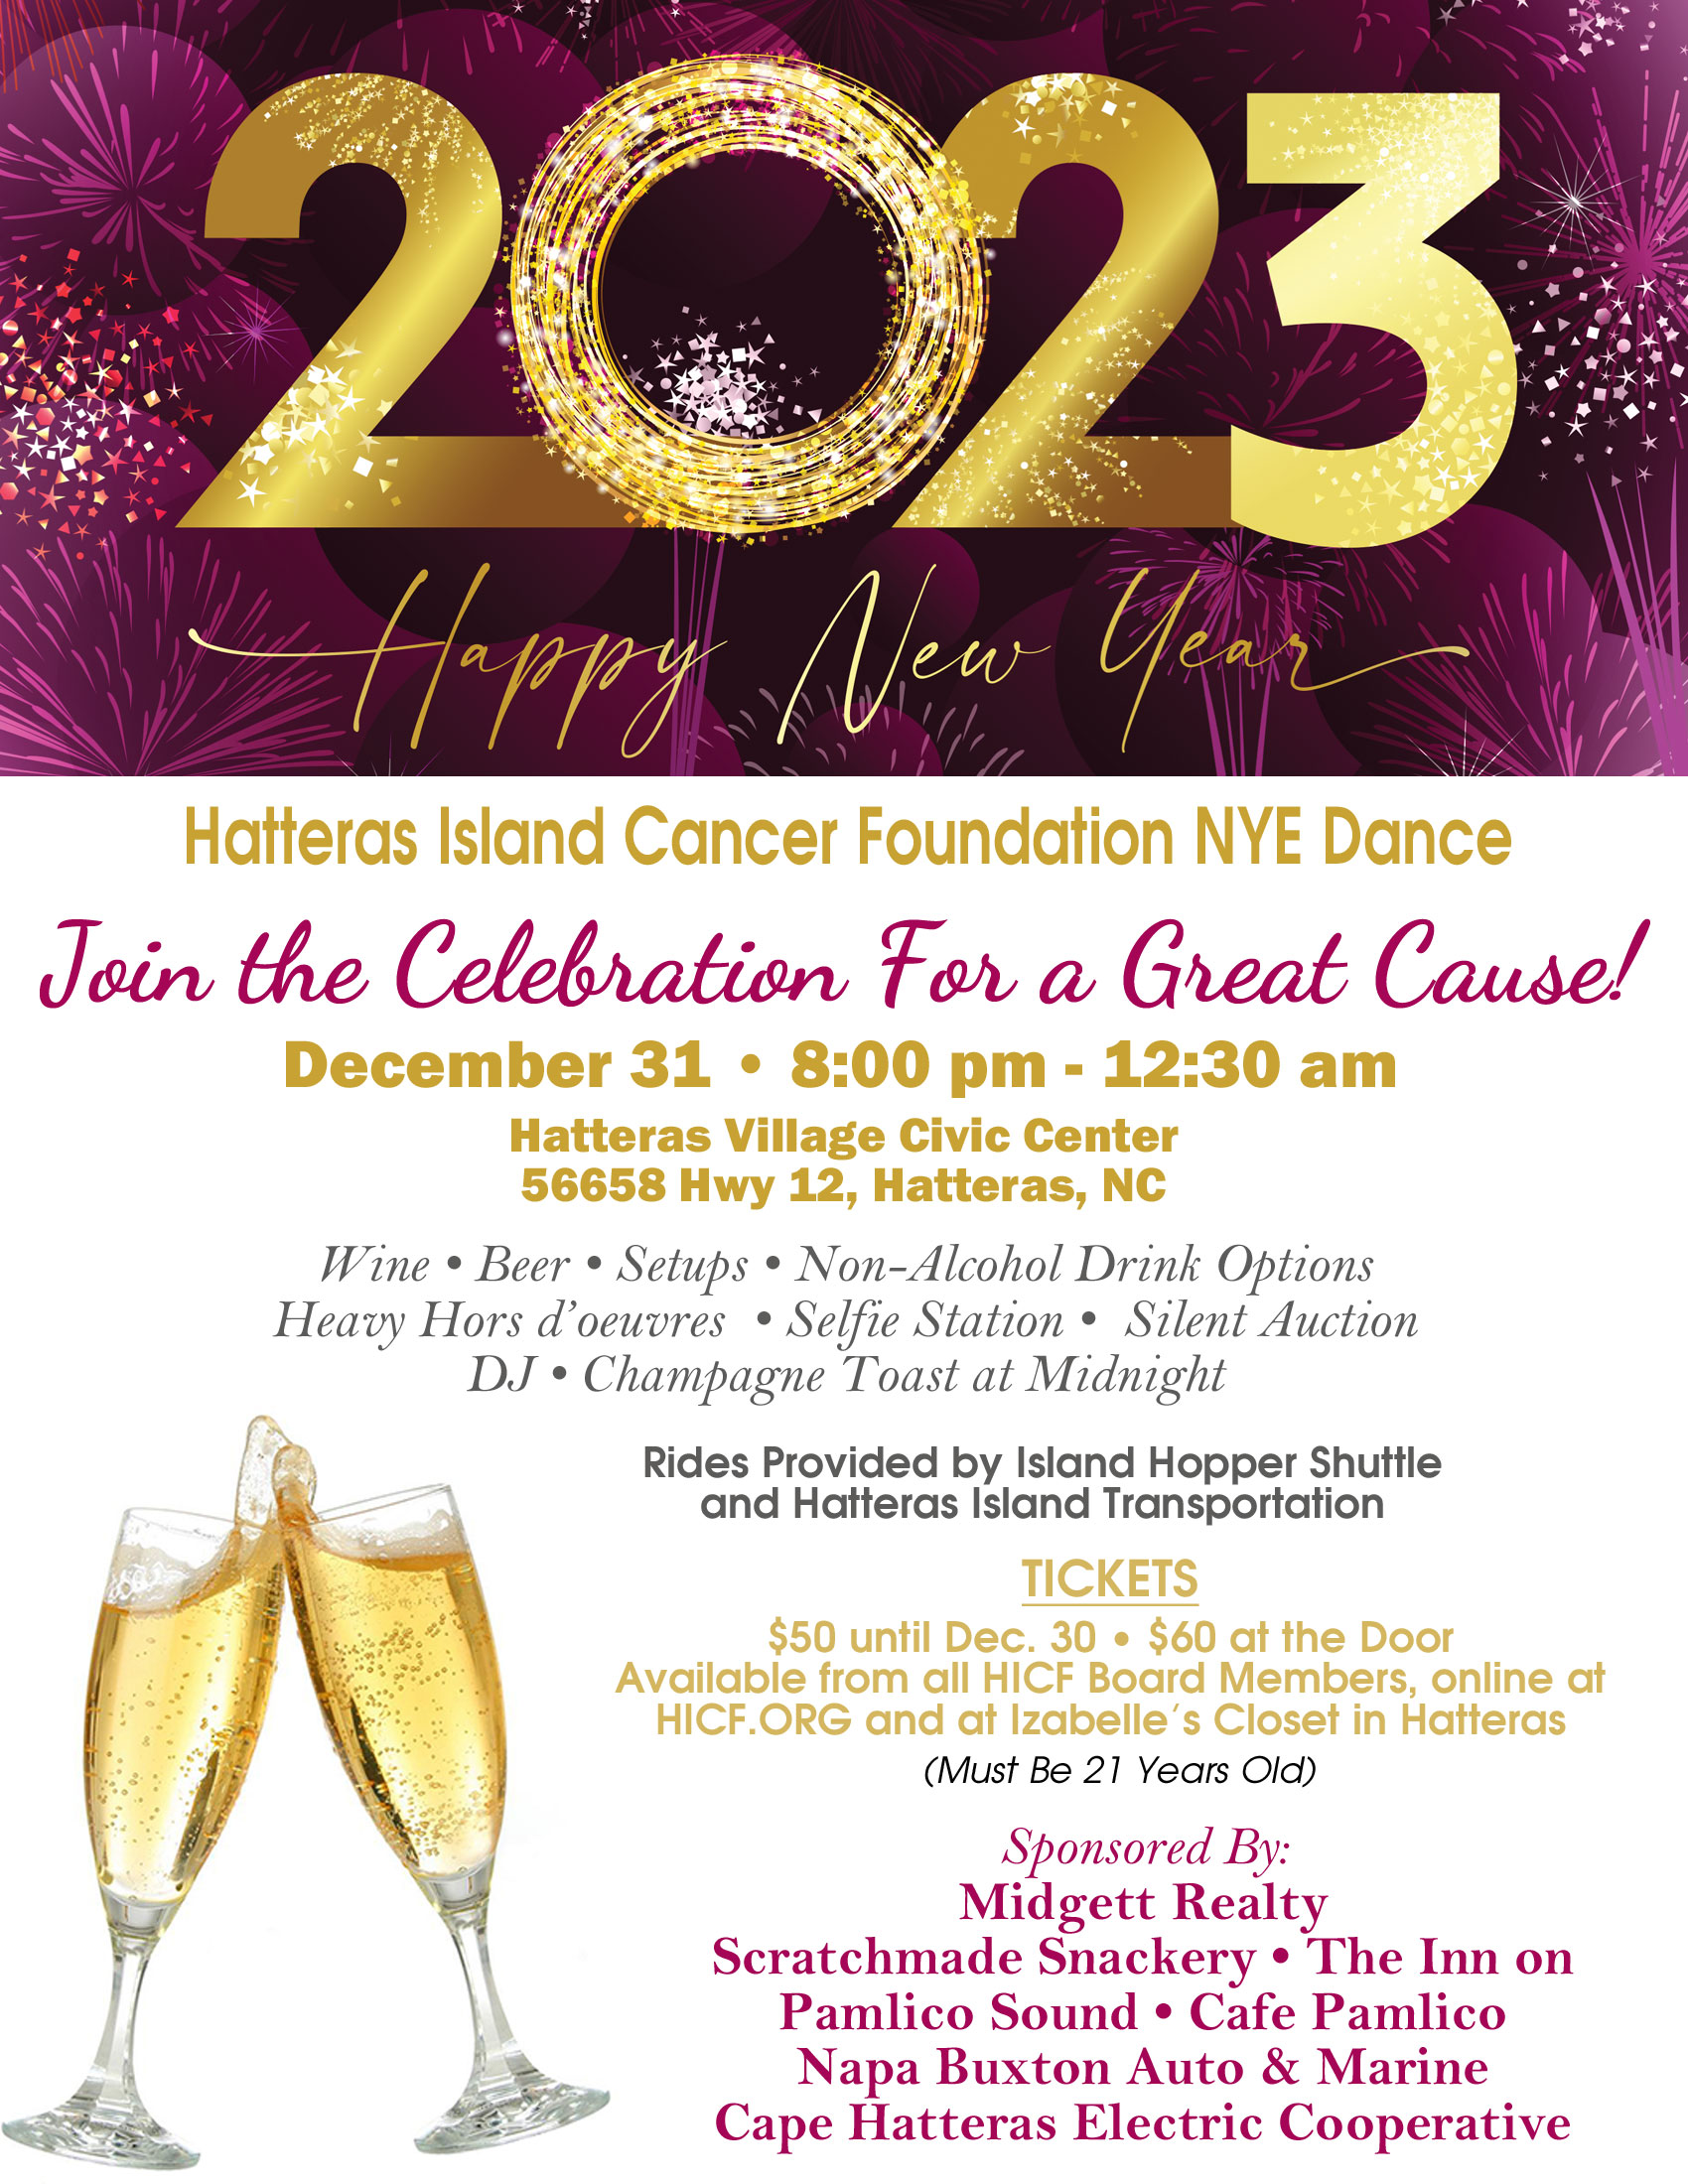 Hatteras Island Cancer Foundation New Years Eve Dance